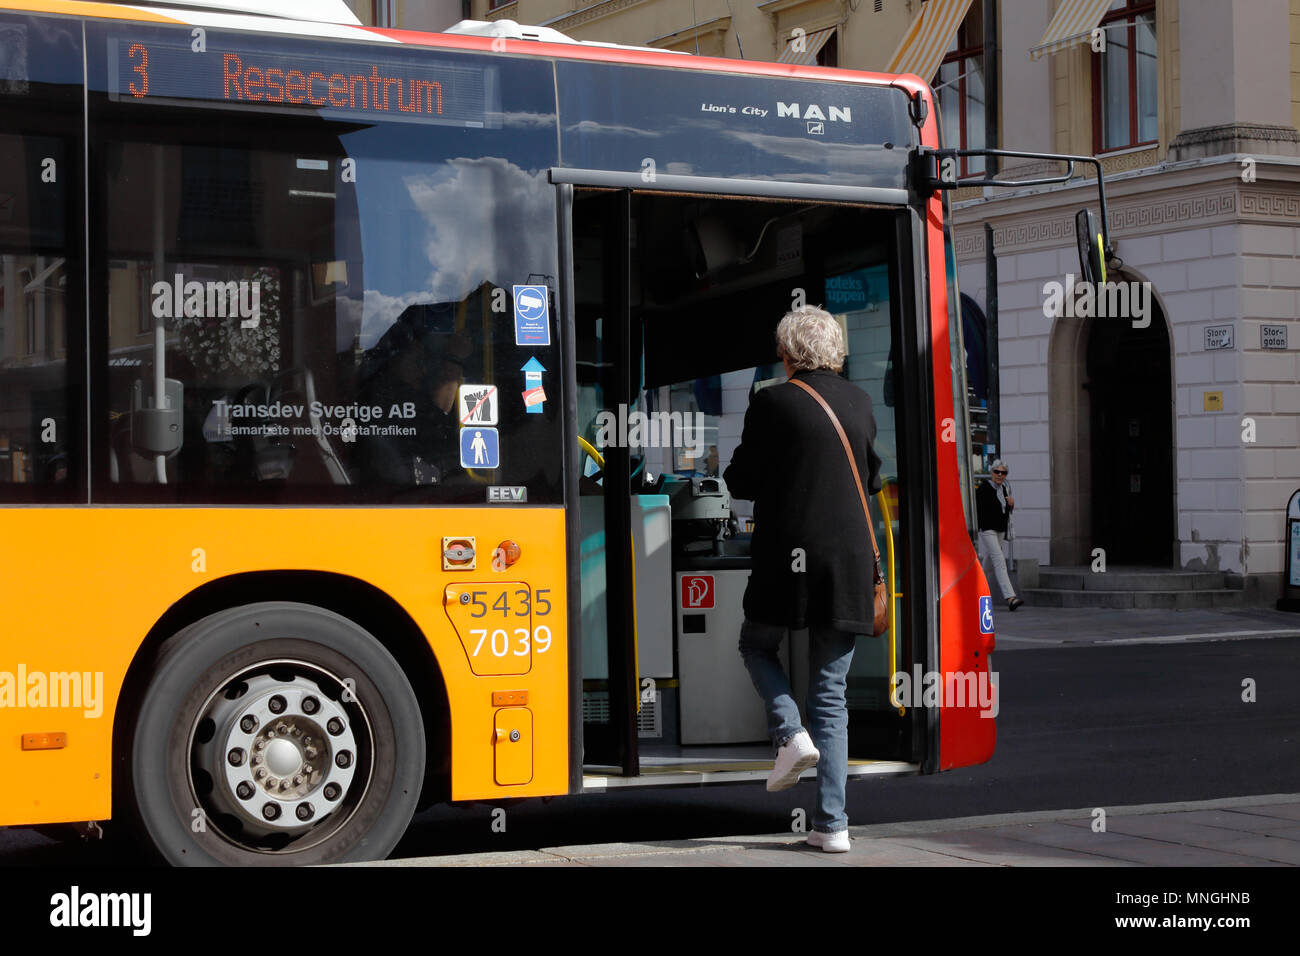 Linkoping, Sweden - August 21, 2017: One person boarding the bus in service on line 3 in downtown. Stock Photo